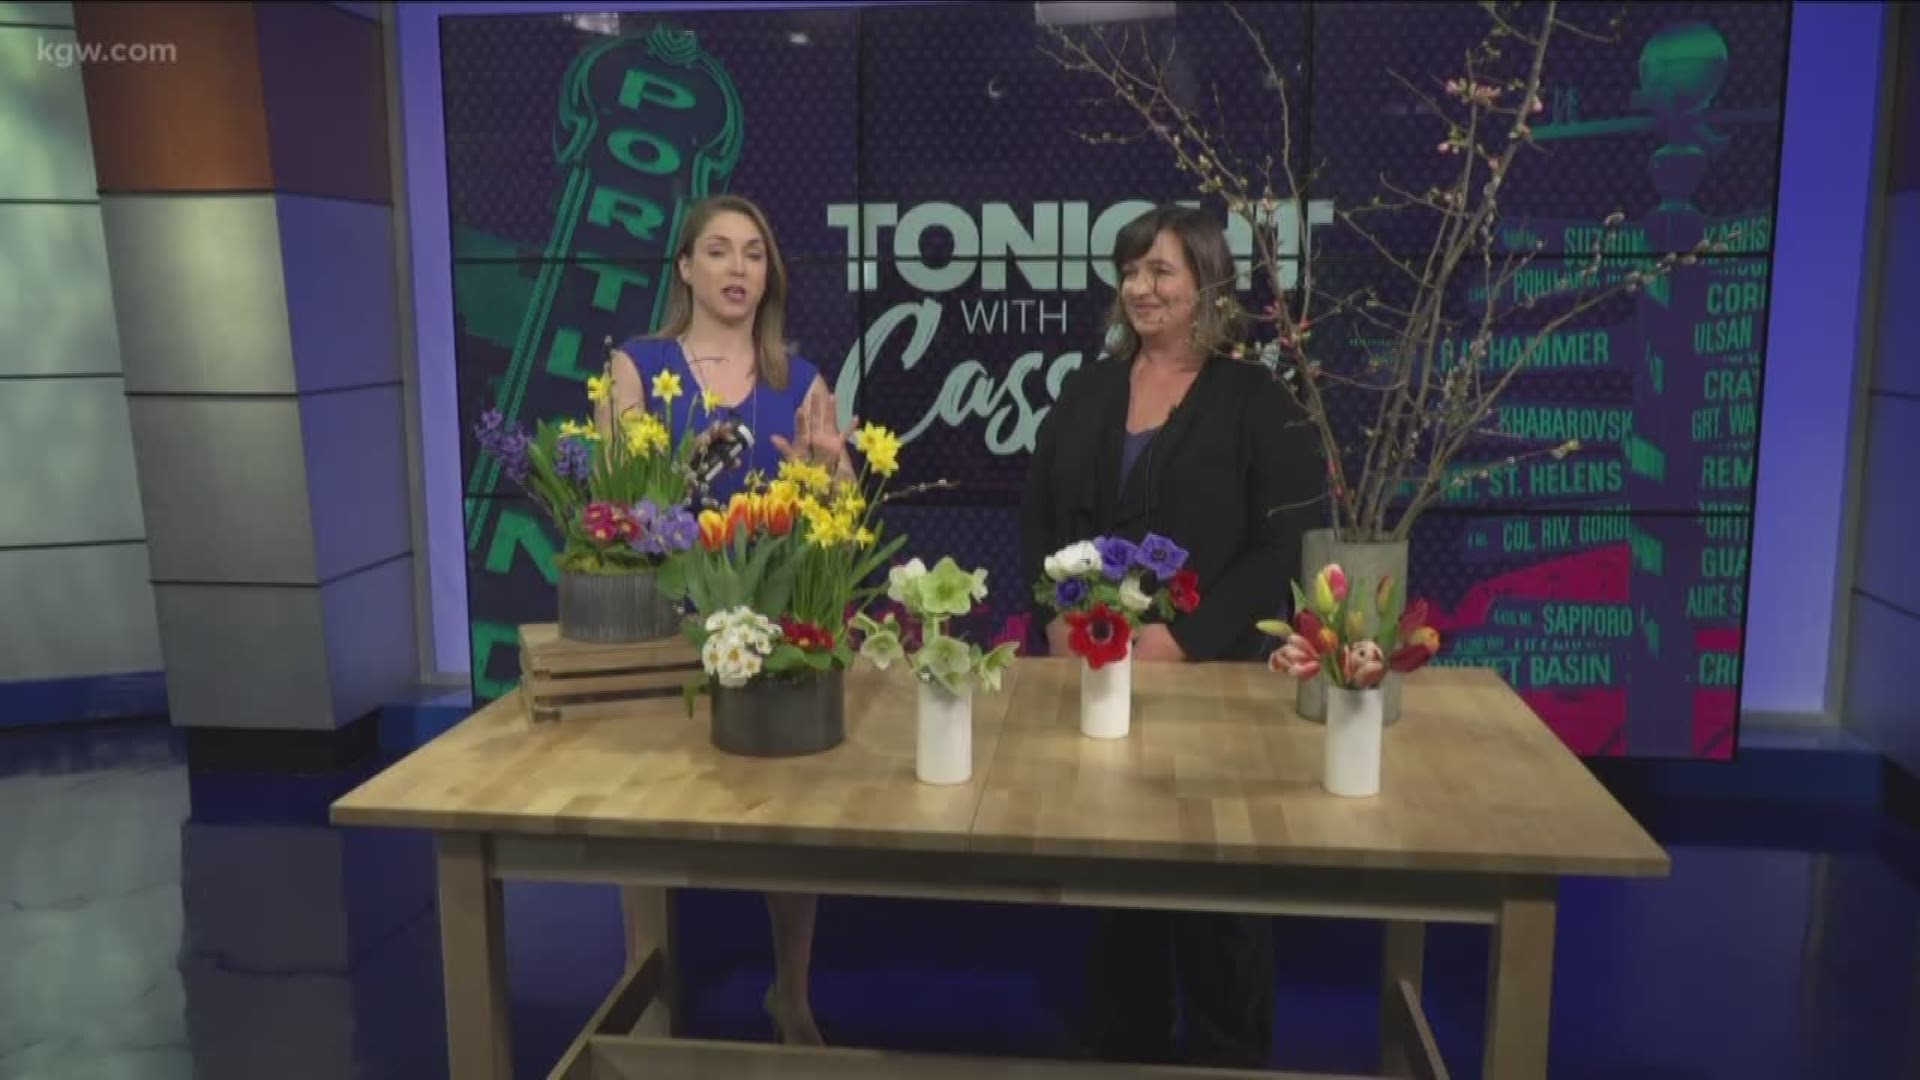 Let the florists at Goose Hollow Flowers help you pick the perfect bouquet to celebrate the Spring season.

goosehollowflowers.com

#TonightwithCassidy